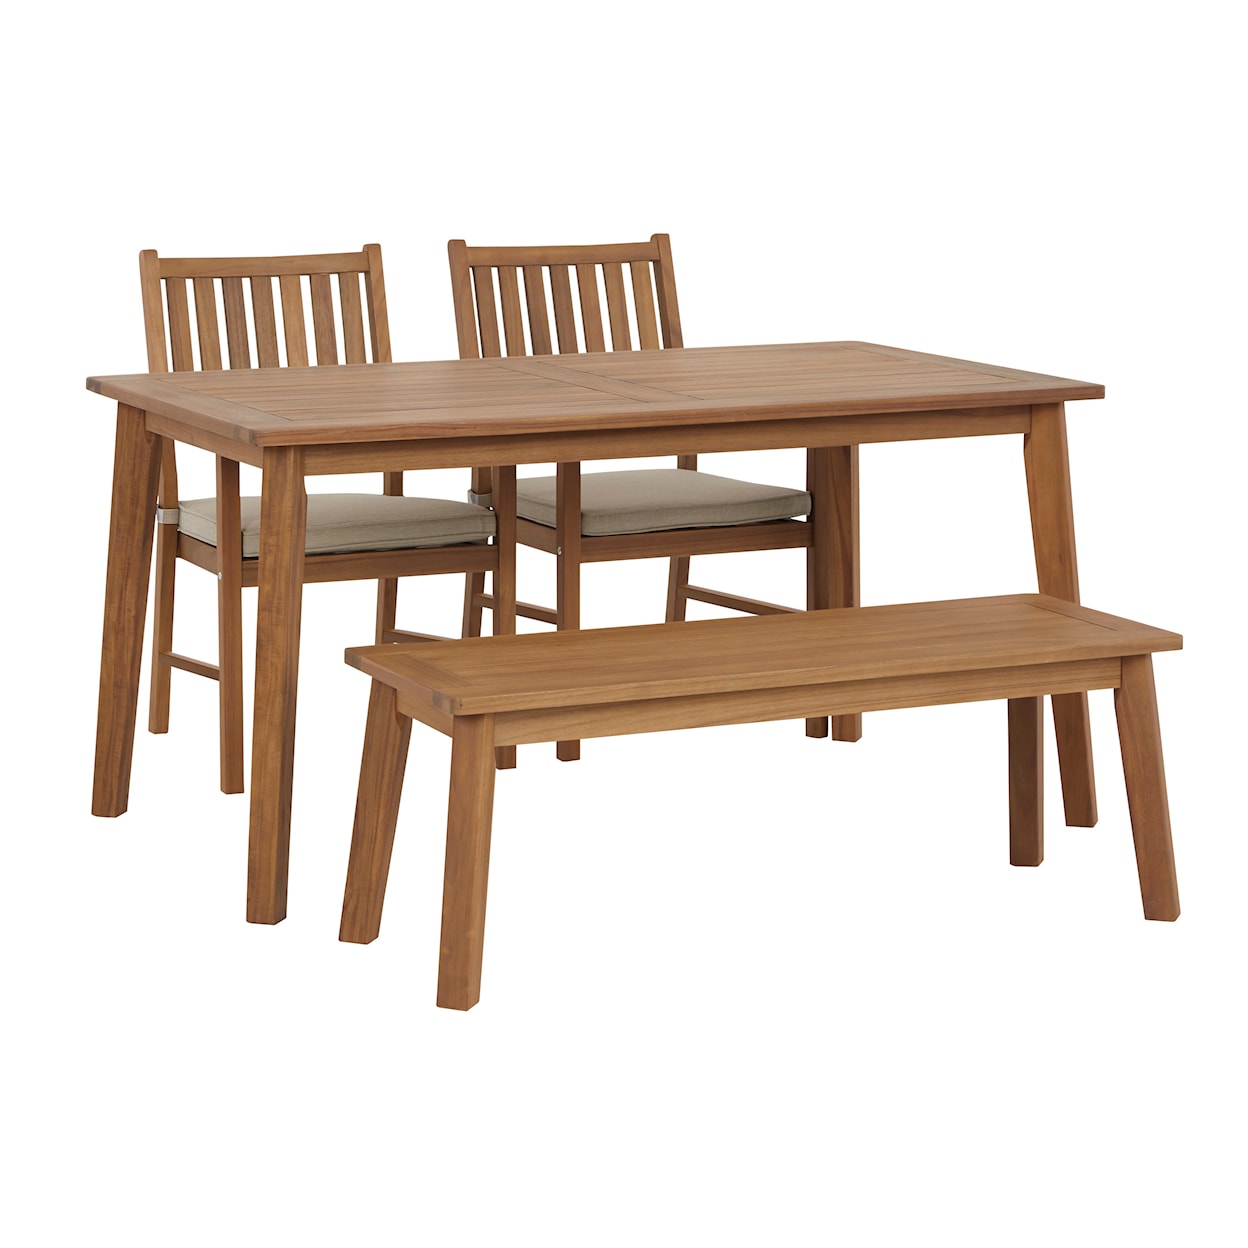 Signature Design by Ashley Janiyah Outdoor Dining Set w/ 2 Chairs & Bench